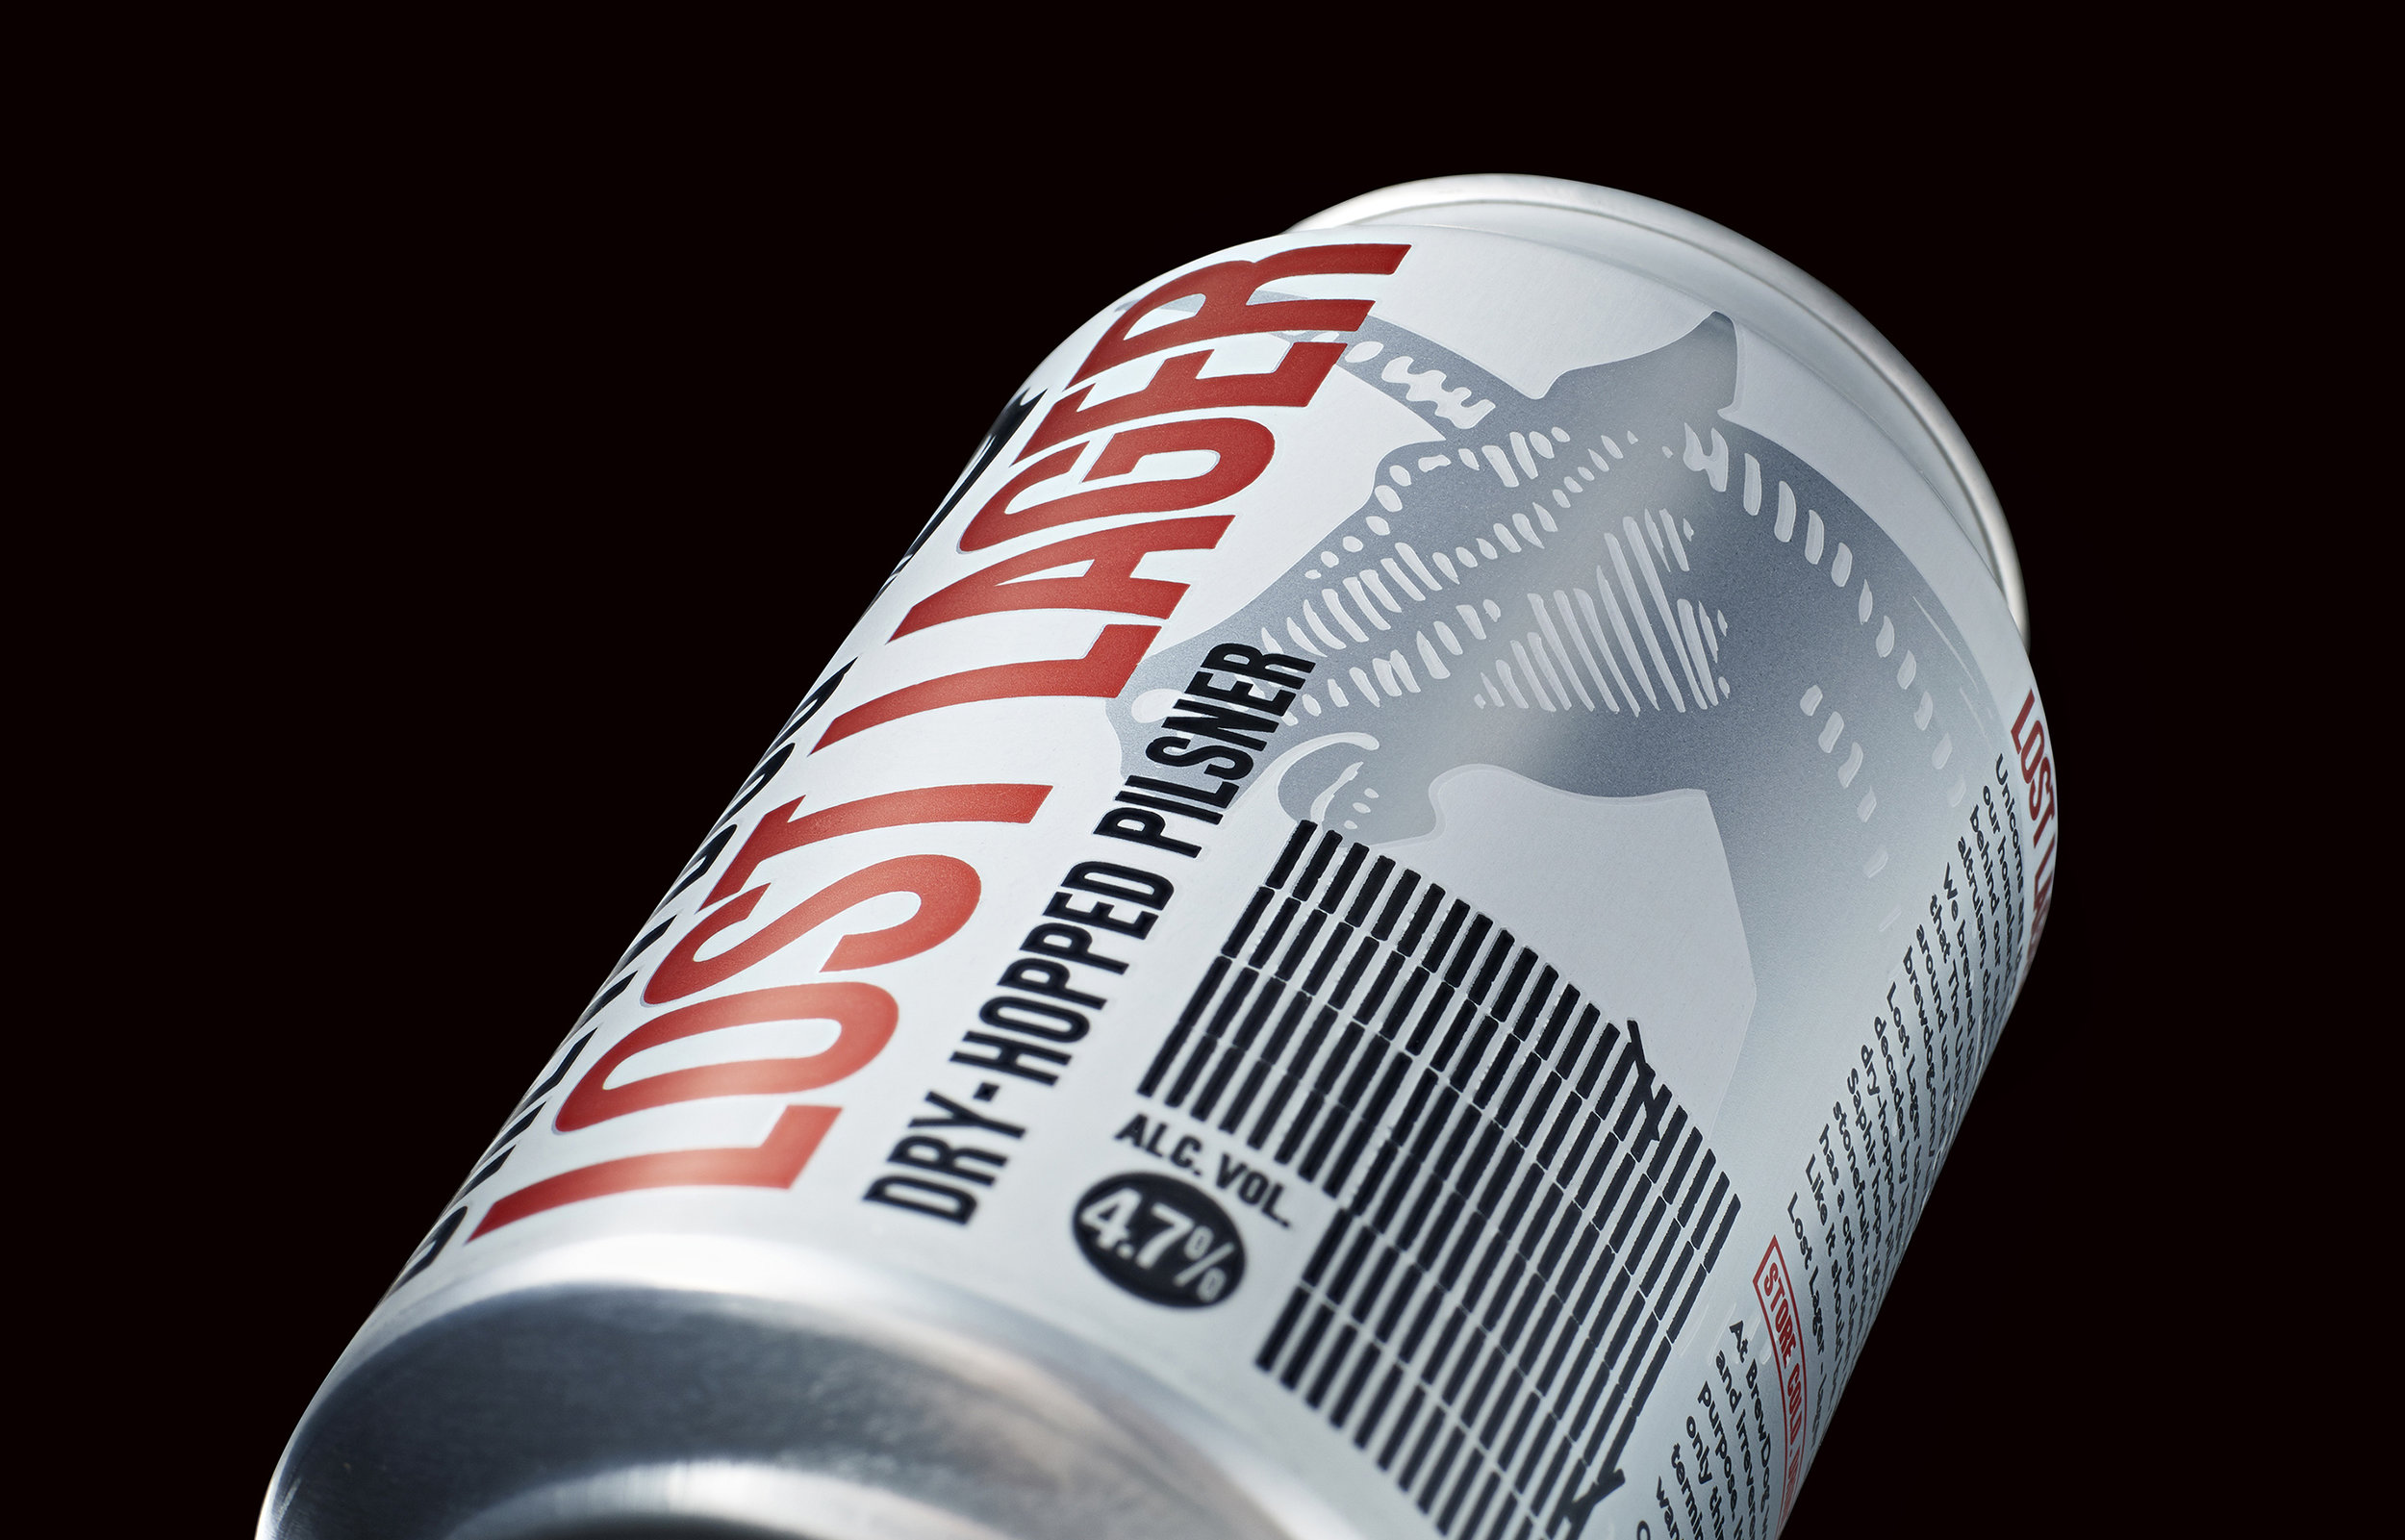 Naming and Packaging Design of BrewDog Newly Launched Lost Lager